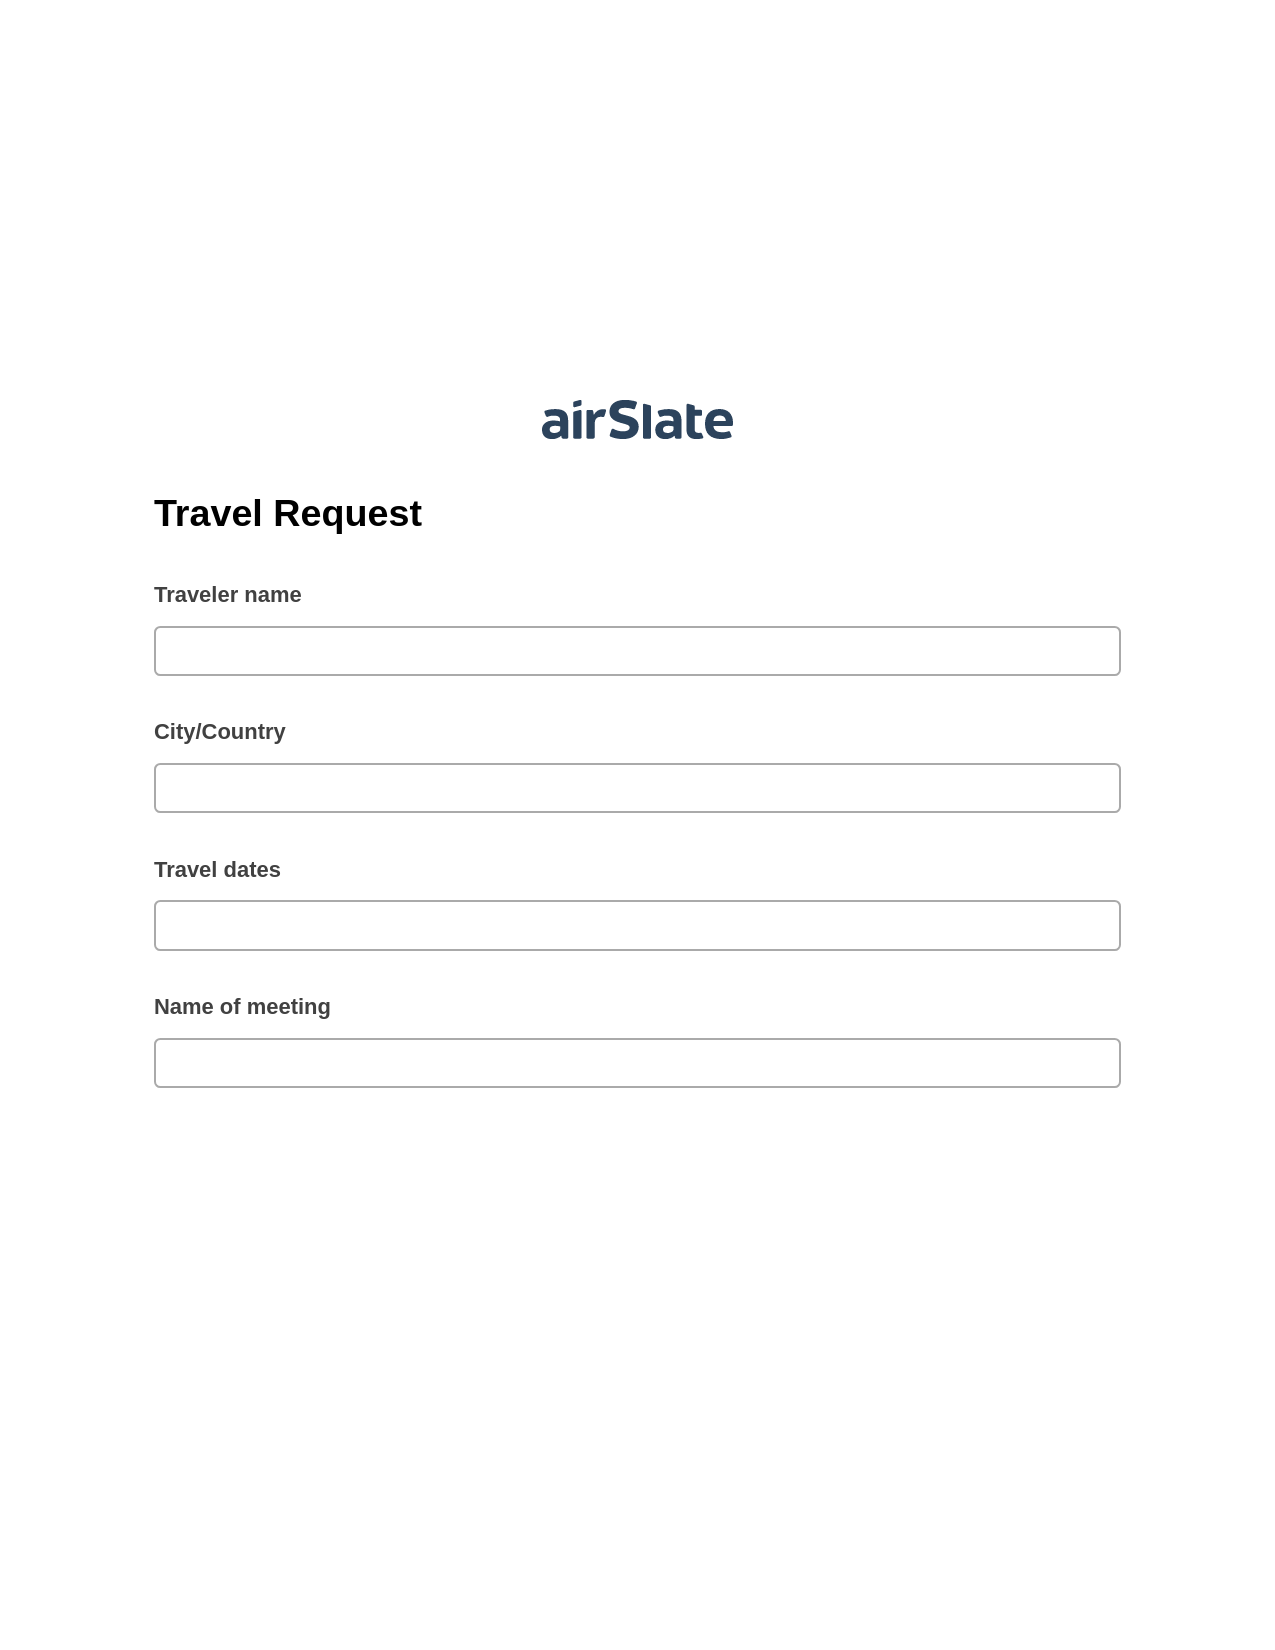 Travel Request Pre-fill from CSV File Bot, Create slate from another Flow Bot, Export to Google Sheet Bot